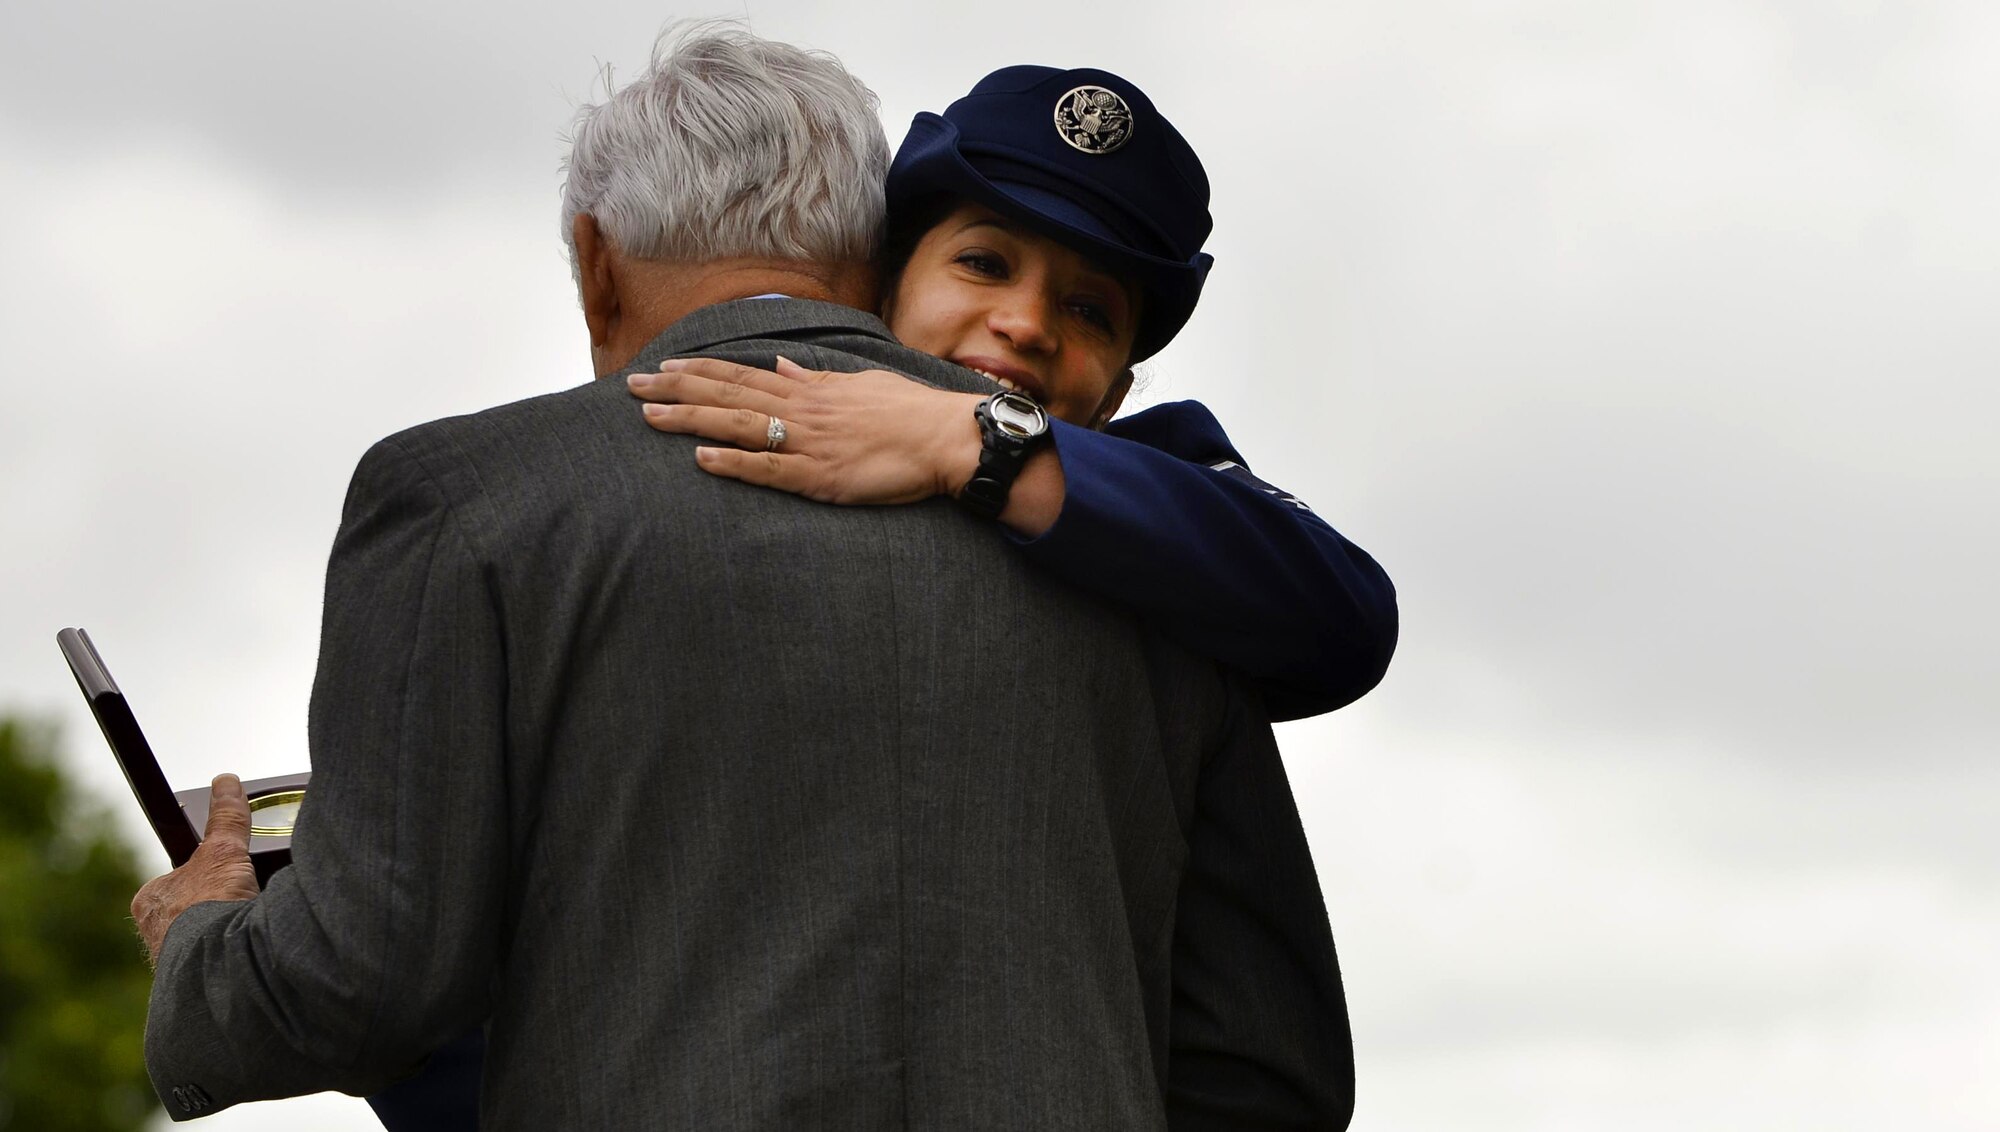 U.S. Air Force Master Sgt. Vanessa Reeves, POW/MIA ceremony coordinator, embraces retired U.S. Air Force Lt. Col. Barry B. Bridger, former Vietnam War prisoner of war, during a POW/MIA Recognition Day ceremony at Joint Base Langley-Eustis, Va., Sept. 16, 2016. In addition to the ceremony, Service members participated in a 24-hour run, during which they ran with the POW/MIA flag to recognize the sacrifices made by those missing in action or those who suffered as prisoners of war. (U.S. Air Force photo by Staff Sgt. Natasha Stannard) 